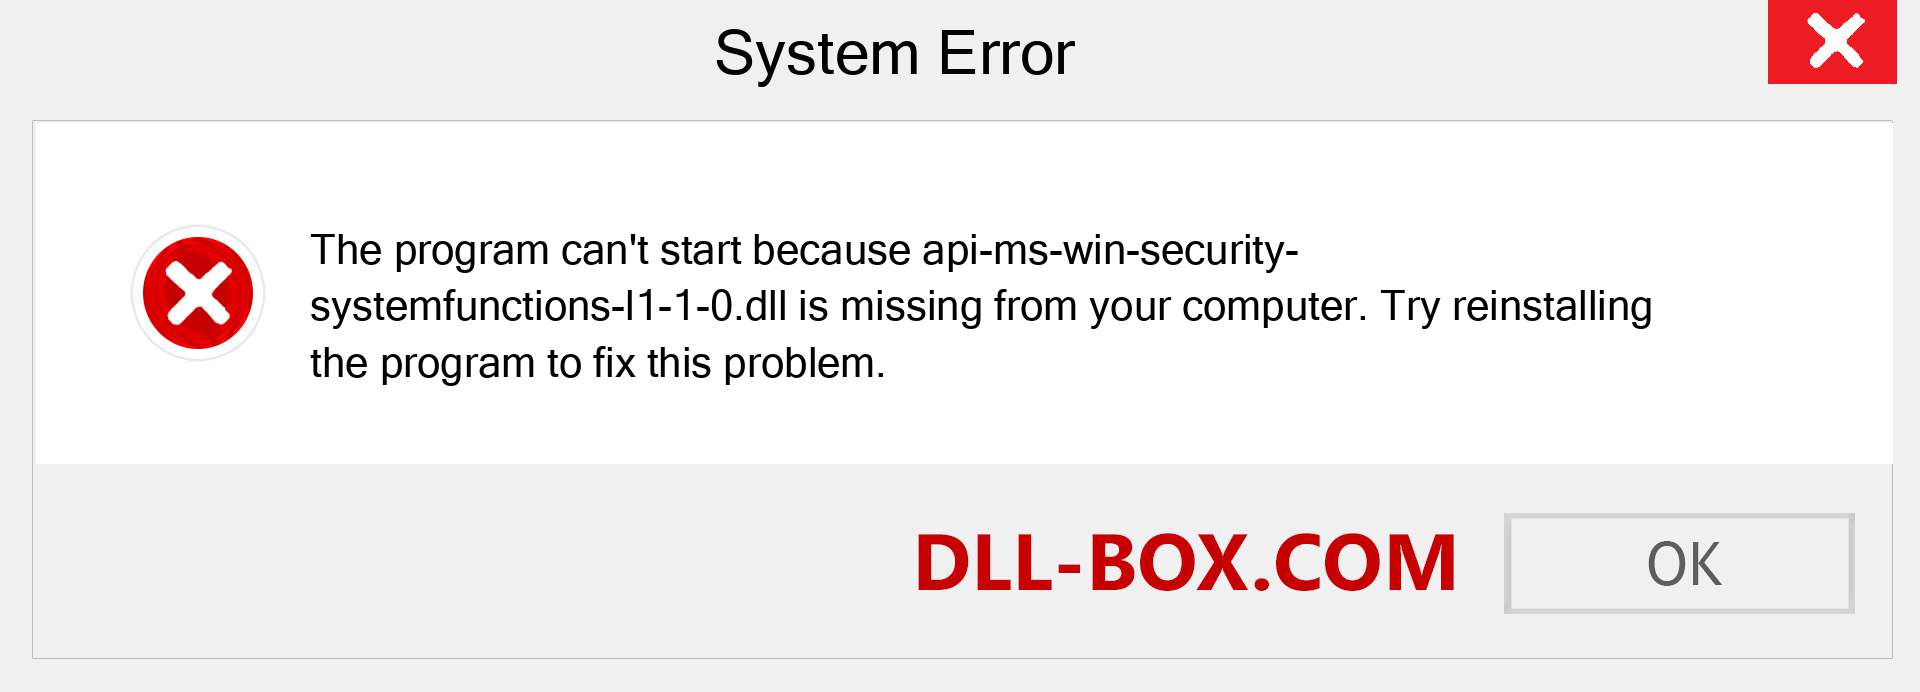  api-ms-win-security-systemfunctions-l1-1-0.dll file is missing?. Download for Windows 7, 8, 10 - Fix  api-ms-win-security-systemfunctions-l1-1-0 dll Missing Error on Windows, photos, images